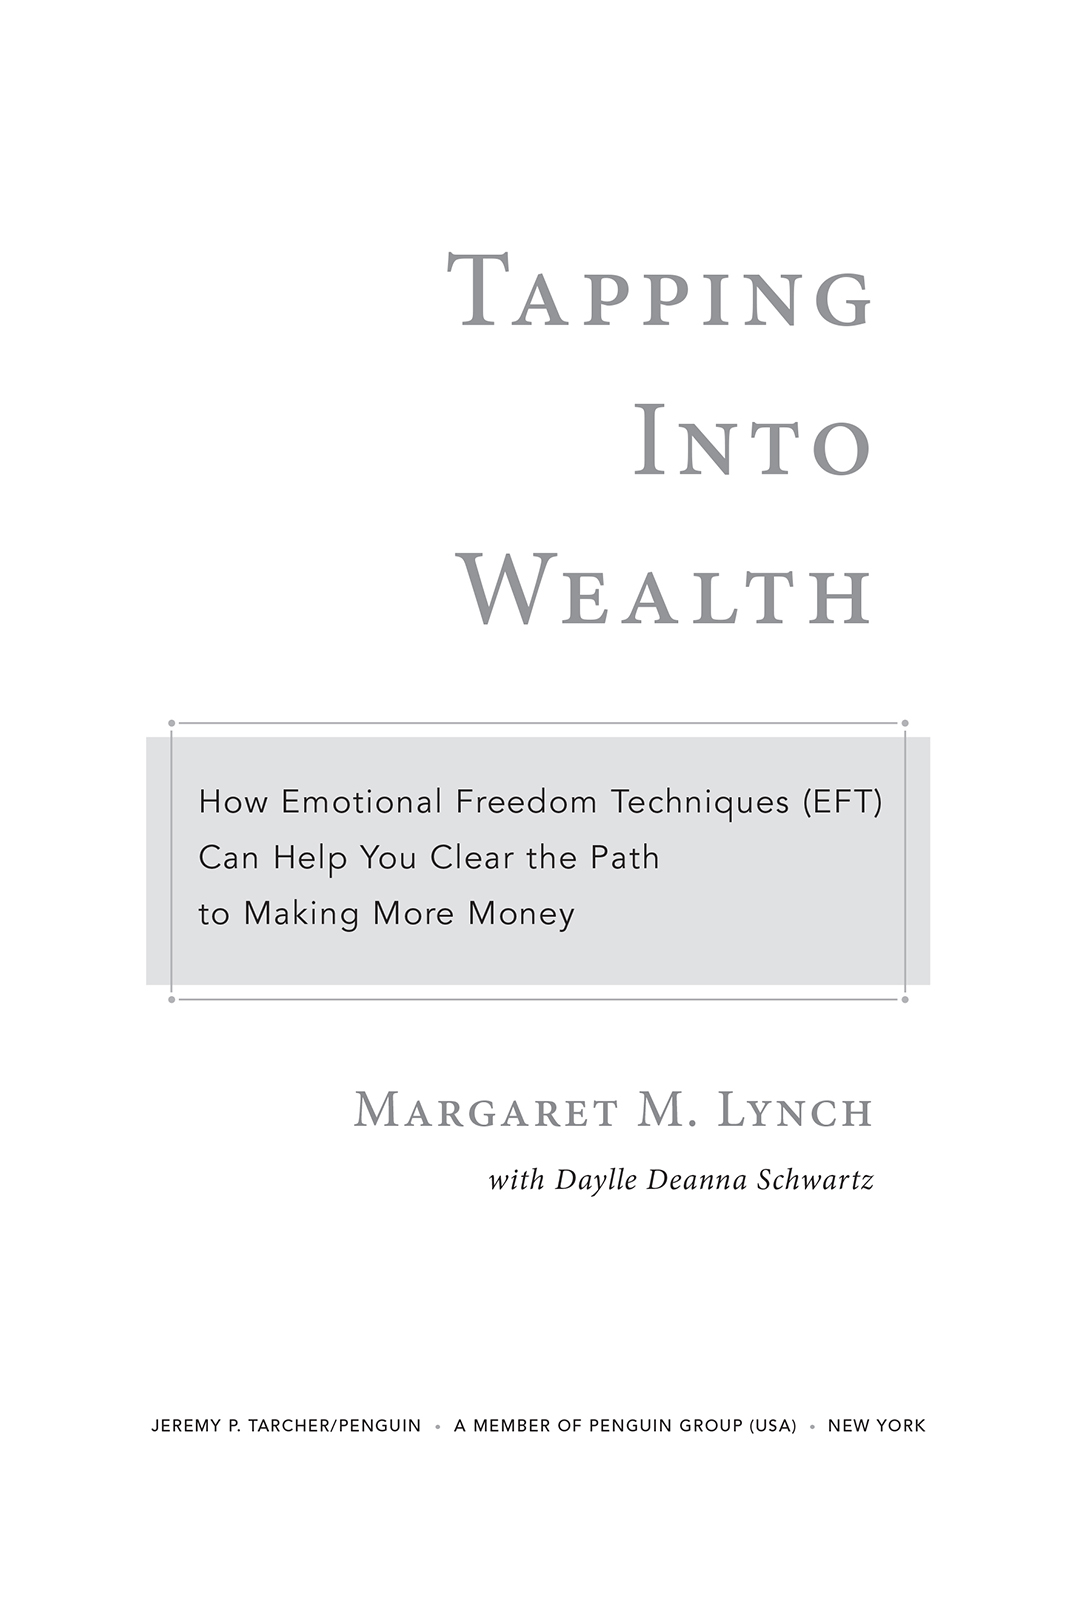 Tapping Into Wealth How Emotional Freedom Techniques EFT Can Help You Clear The Path to Making More Money - image 2